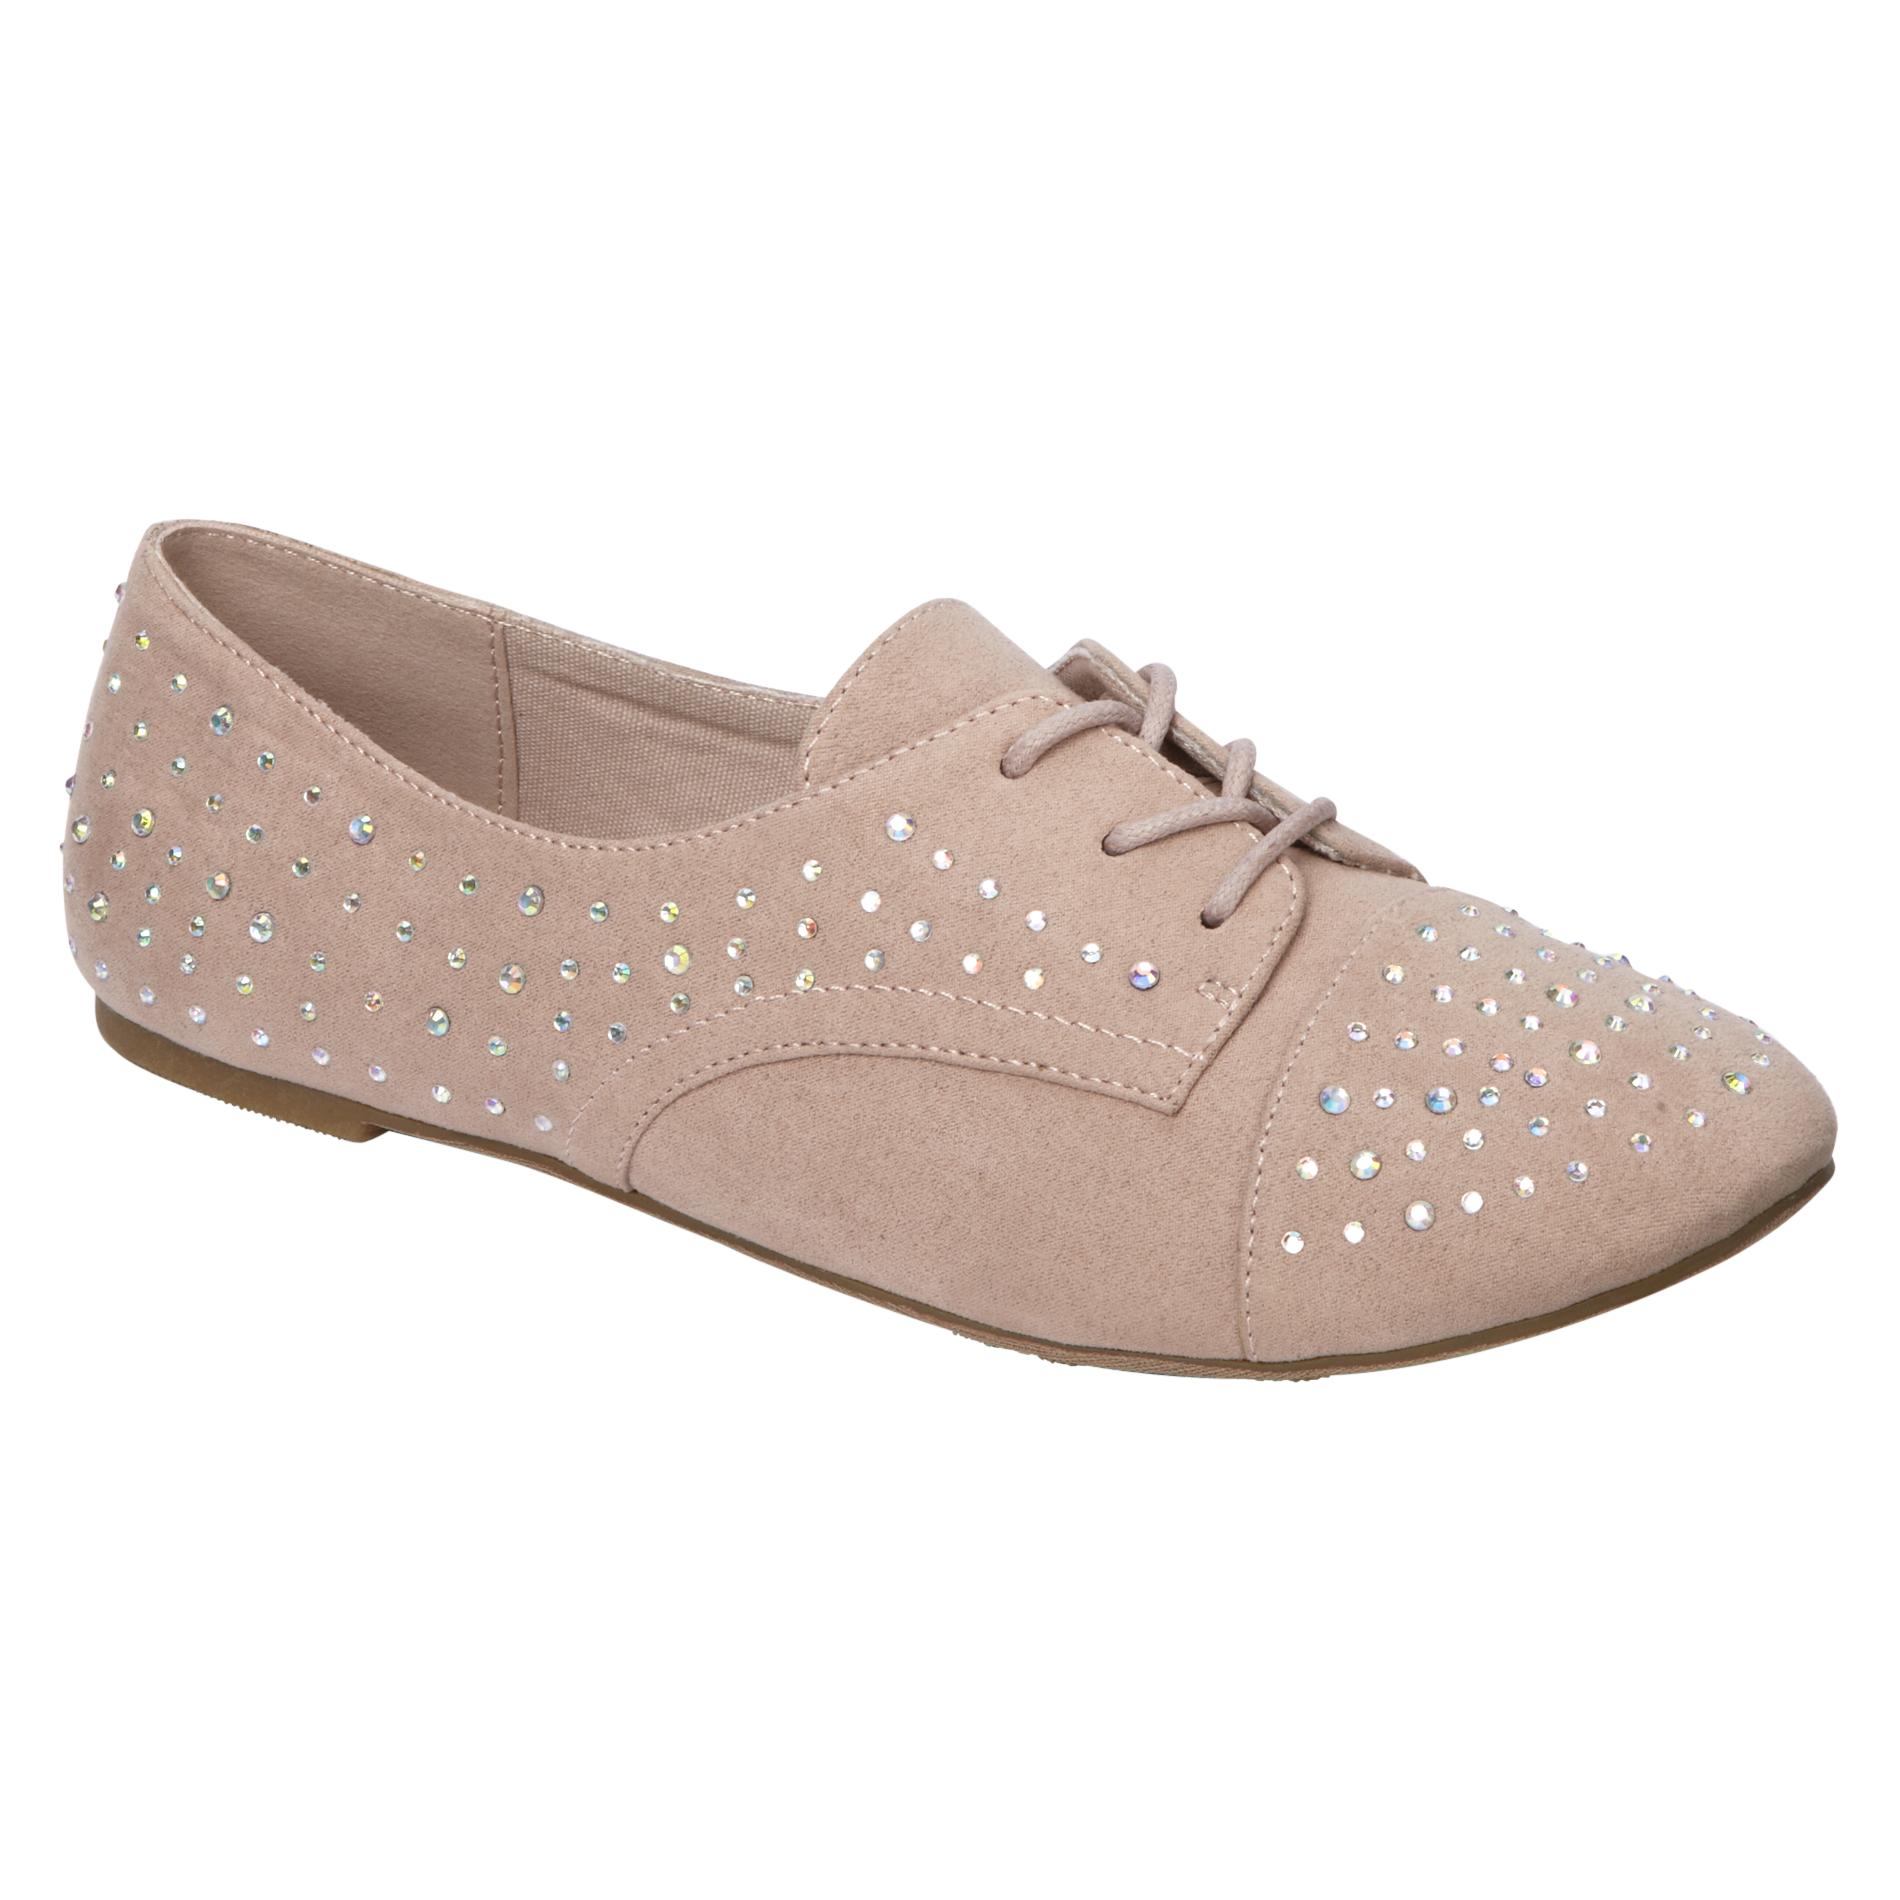 Route 66 Women's Casual Flat Candy - Blush